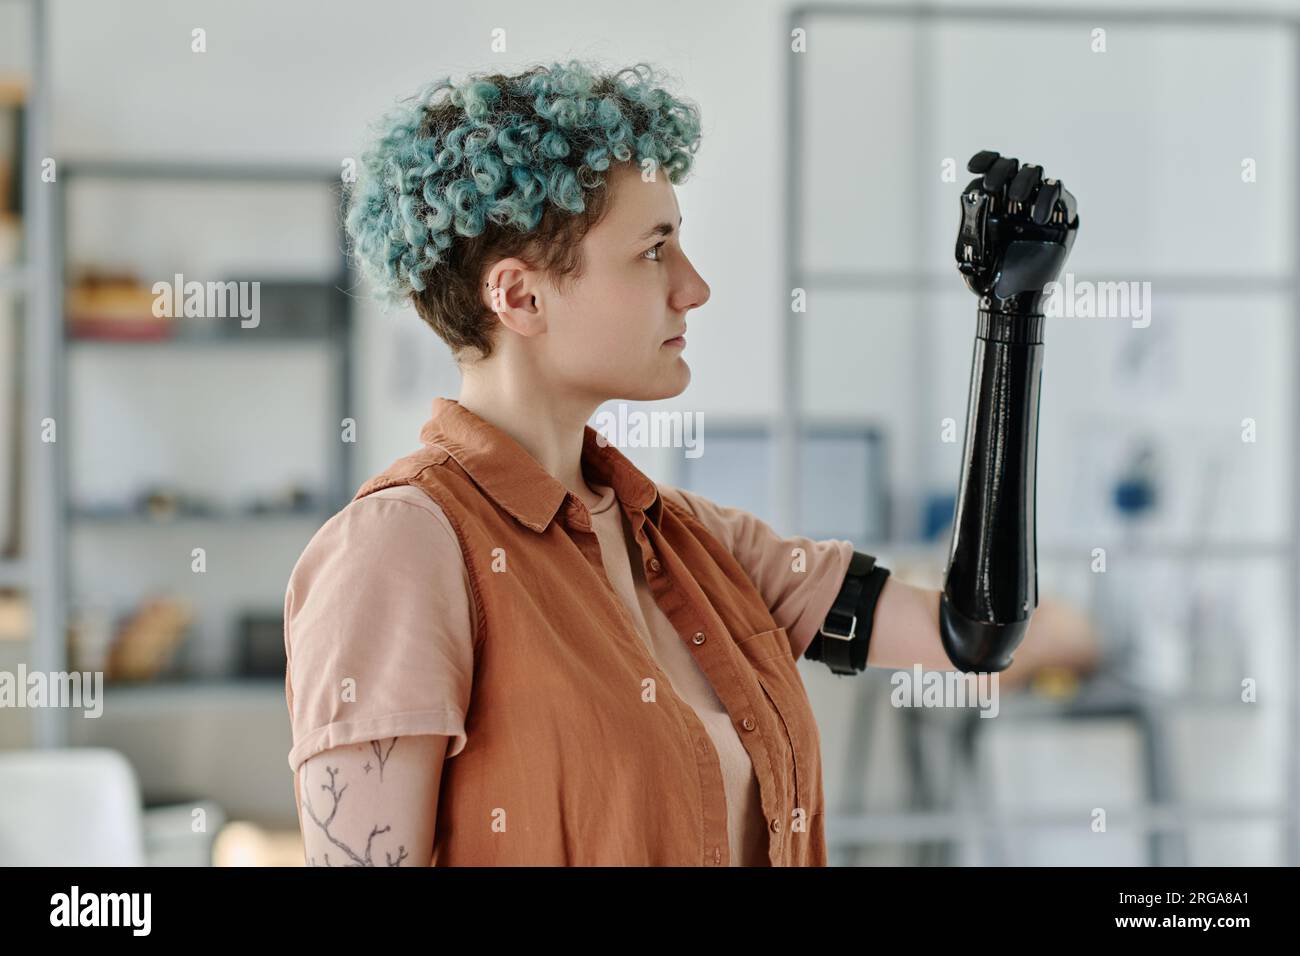 Side view portrait of young woman looking at cyber prosthetic arm and smiling Stock Photo